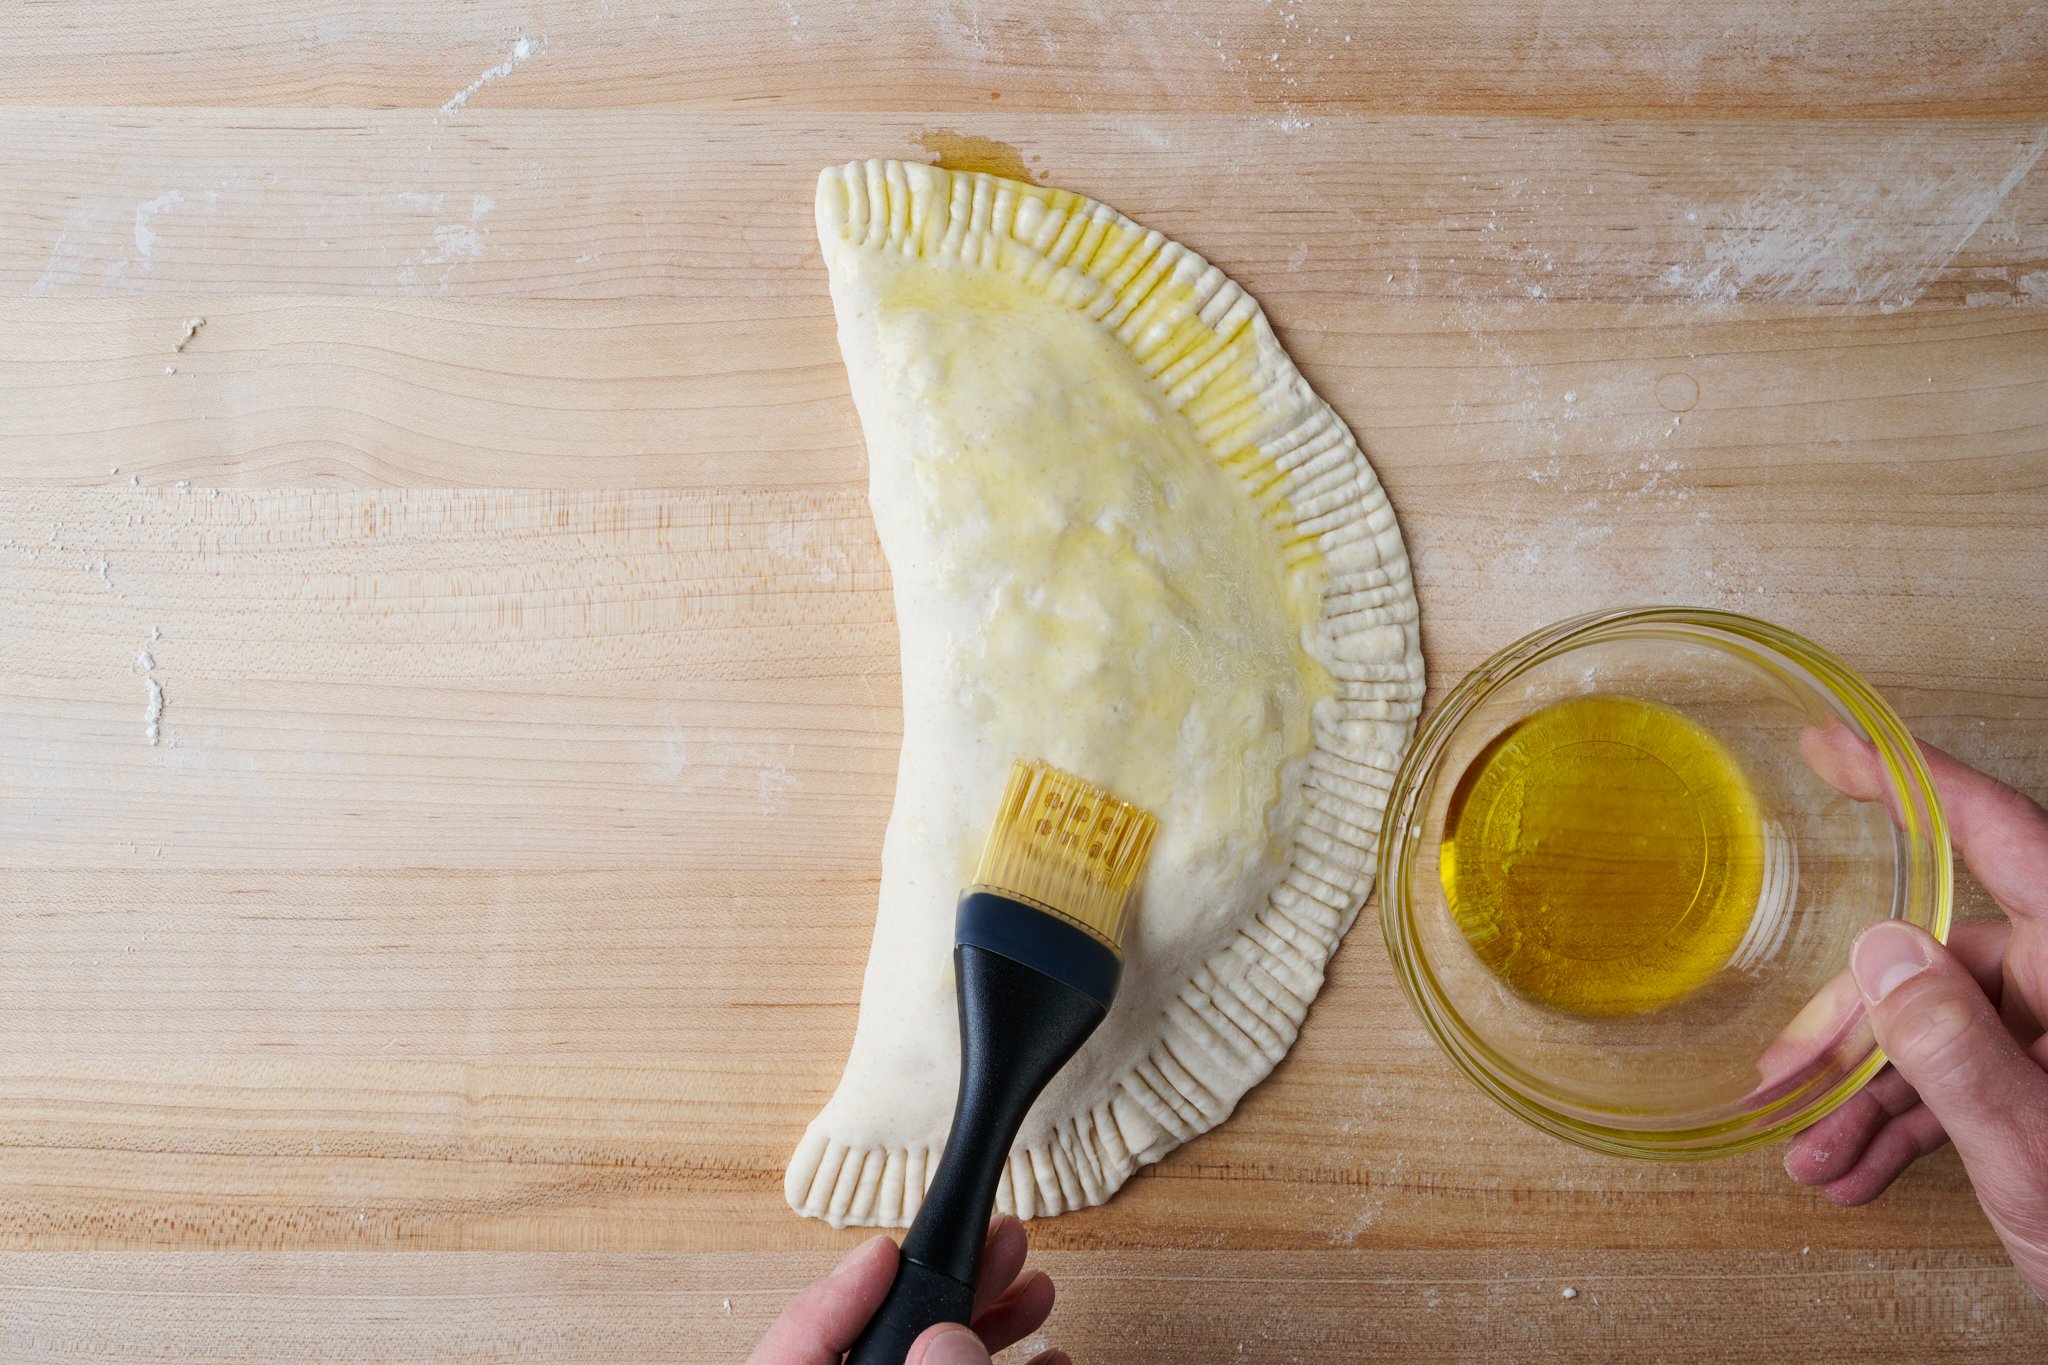 Brush calzone dough with olive oil